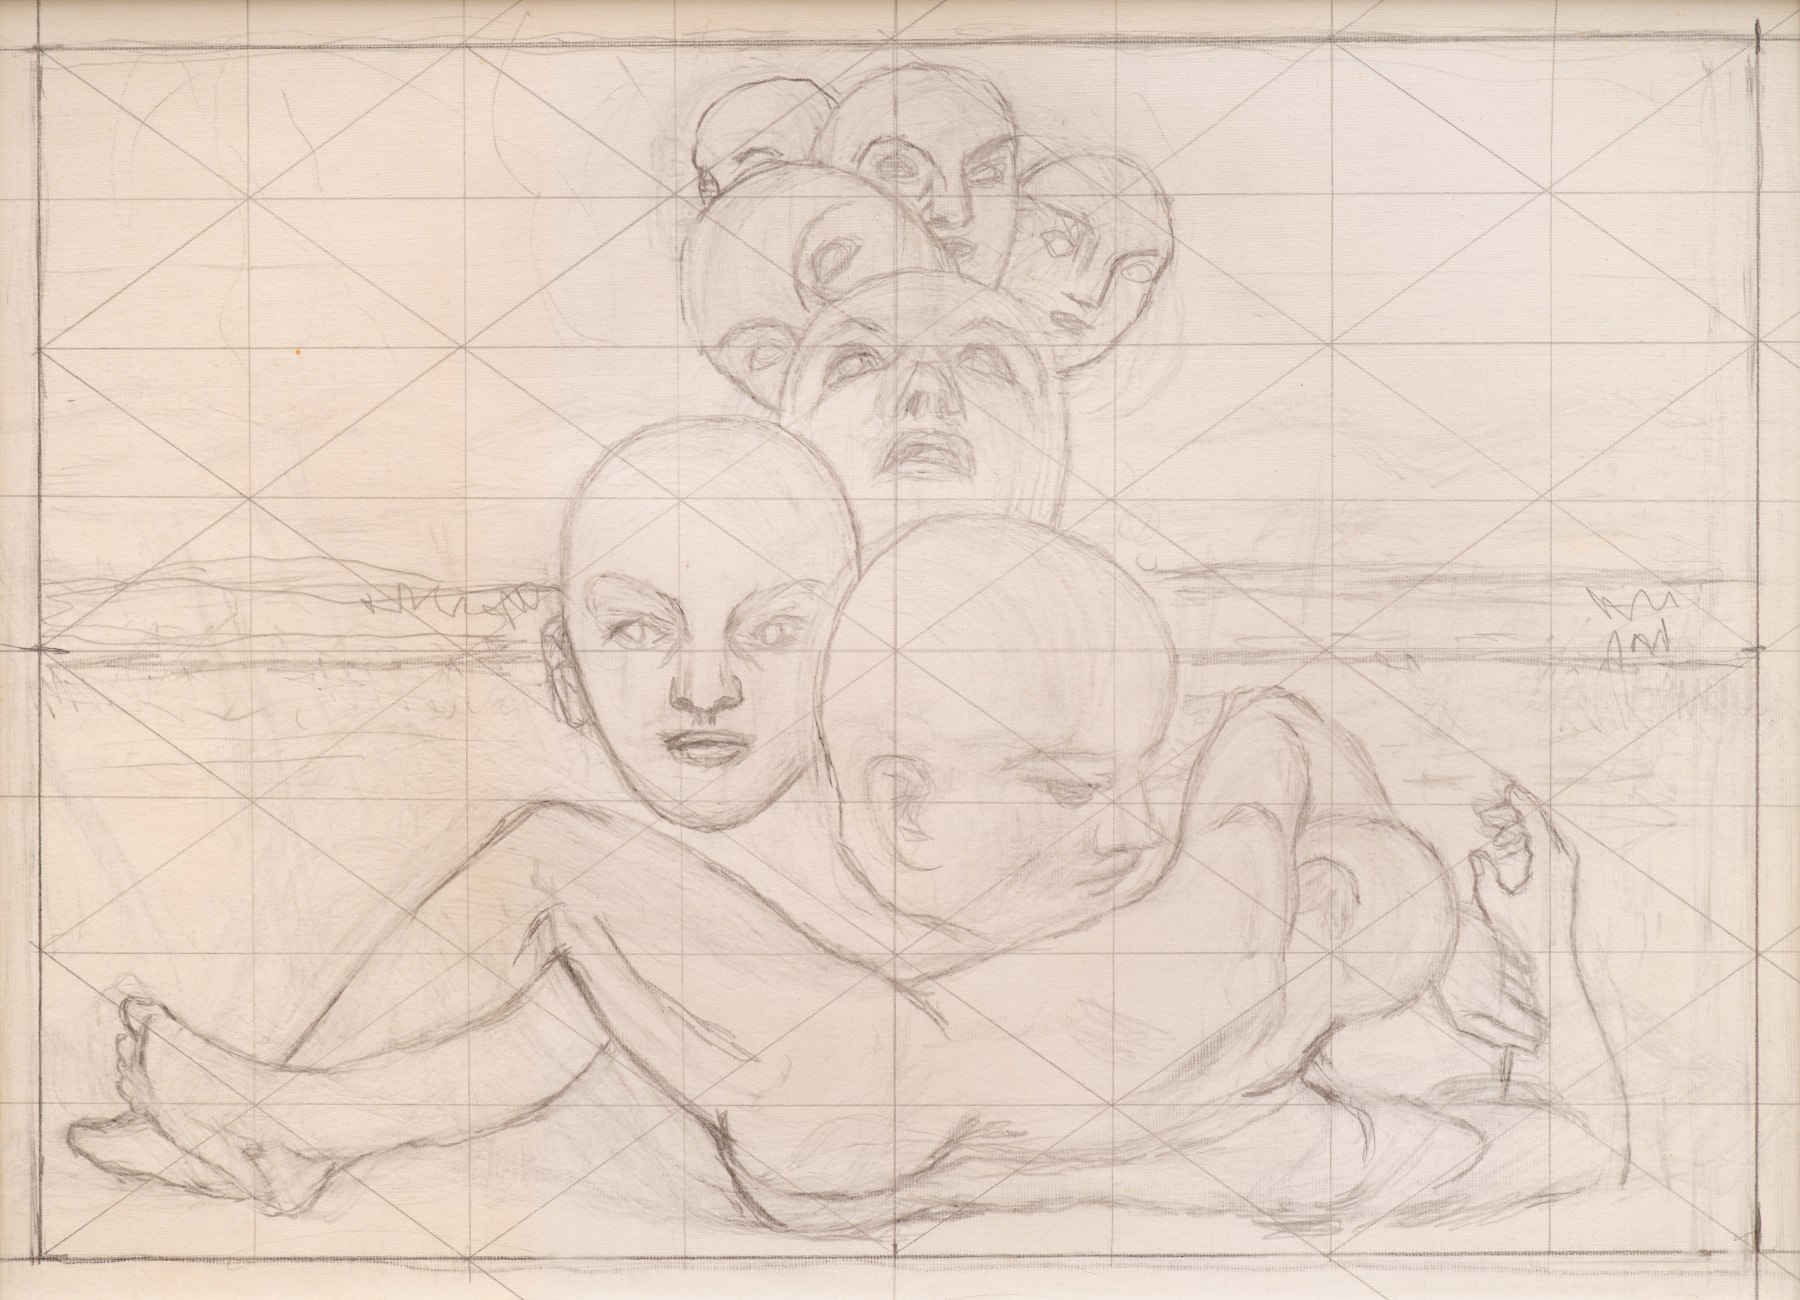 Reclining Figures with Heads, c. 1960s Pencil on paper 8 1/8 x 11 1/2 inches